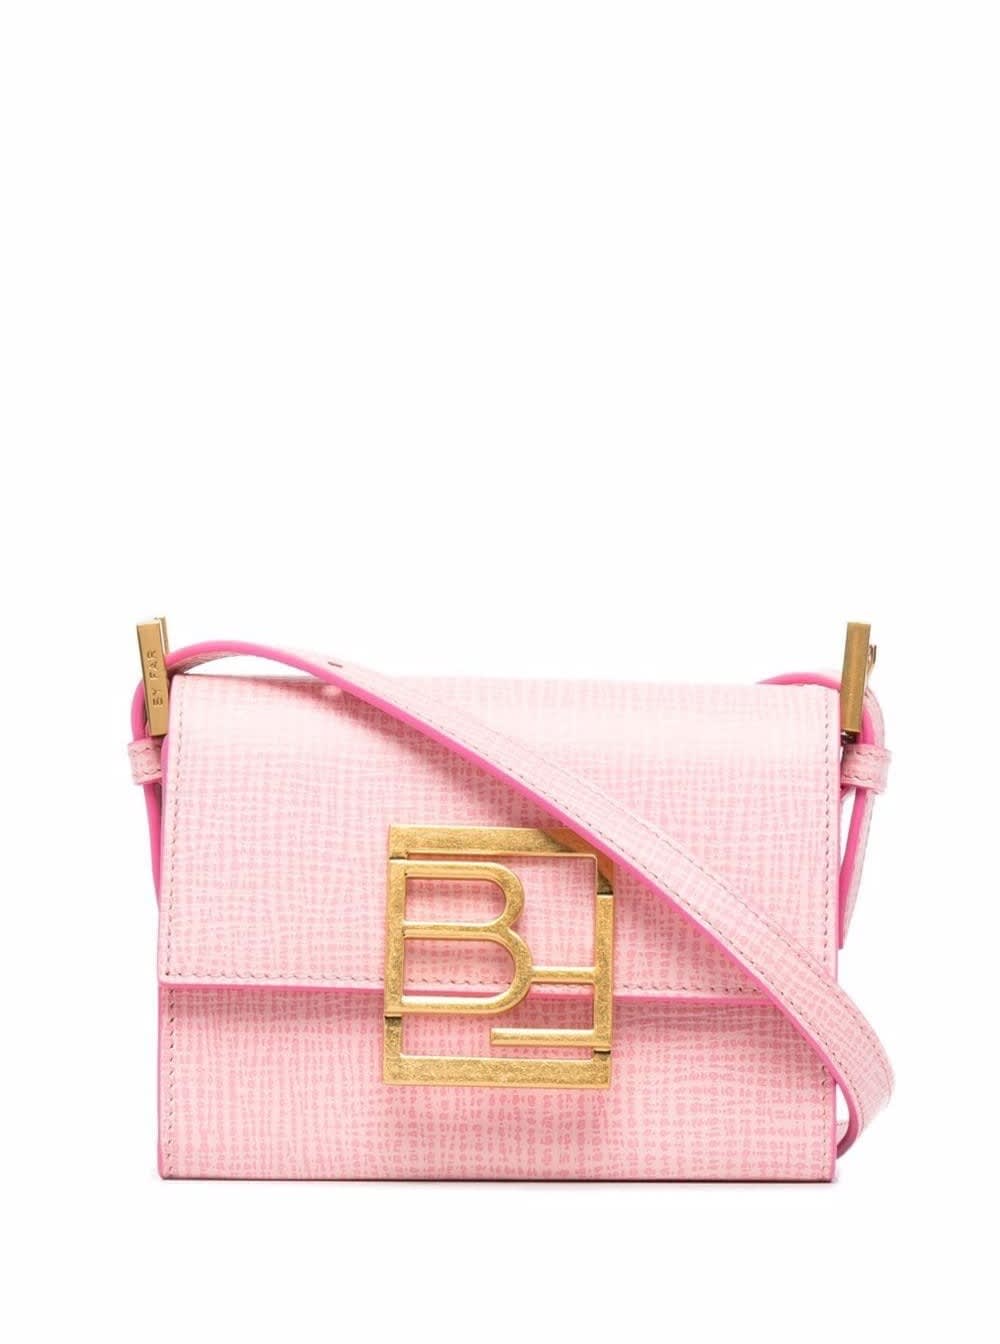 BY FAR Pink Leather Crossbdoy Bag With Logo Buckle